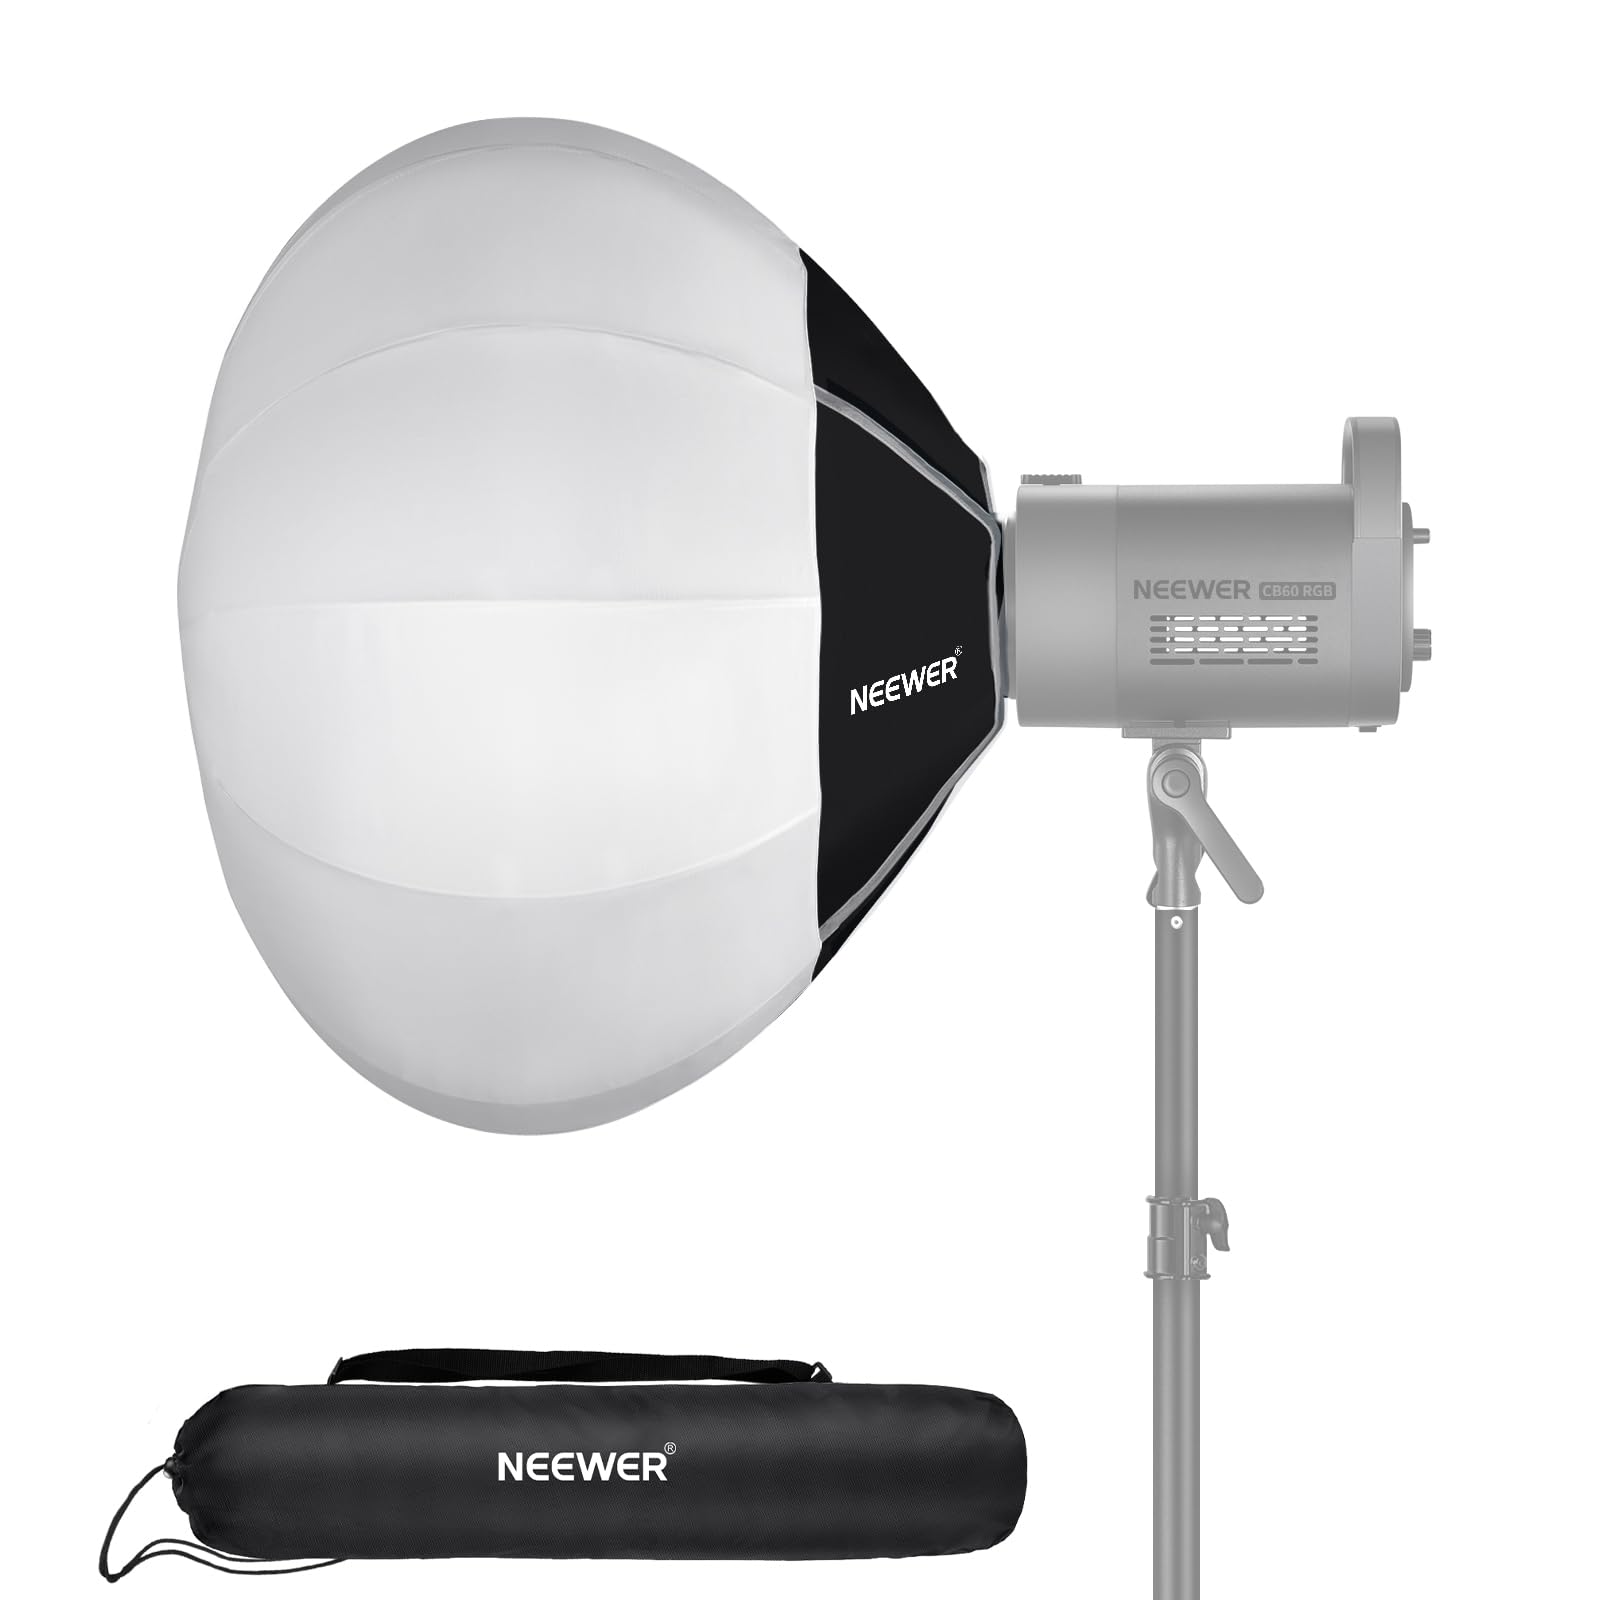 NEEWER 20"/50cm Lantern Softbox, Quick Release 360° Light Diffuser Bowens Mount Softbox with Lightweight Nylon Alloy for RGB CB60 CB60B CB200B MS60B MS60C MS150B Continuous LED Video Lights, NS20L